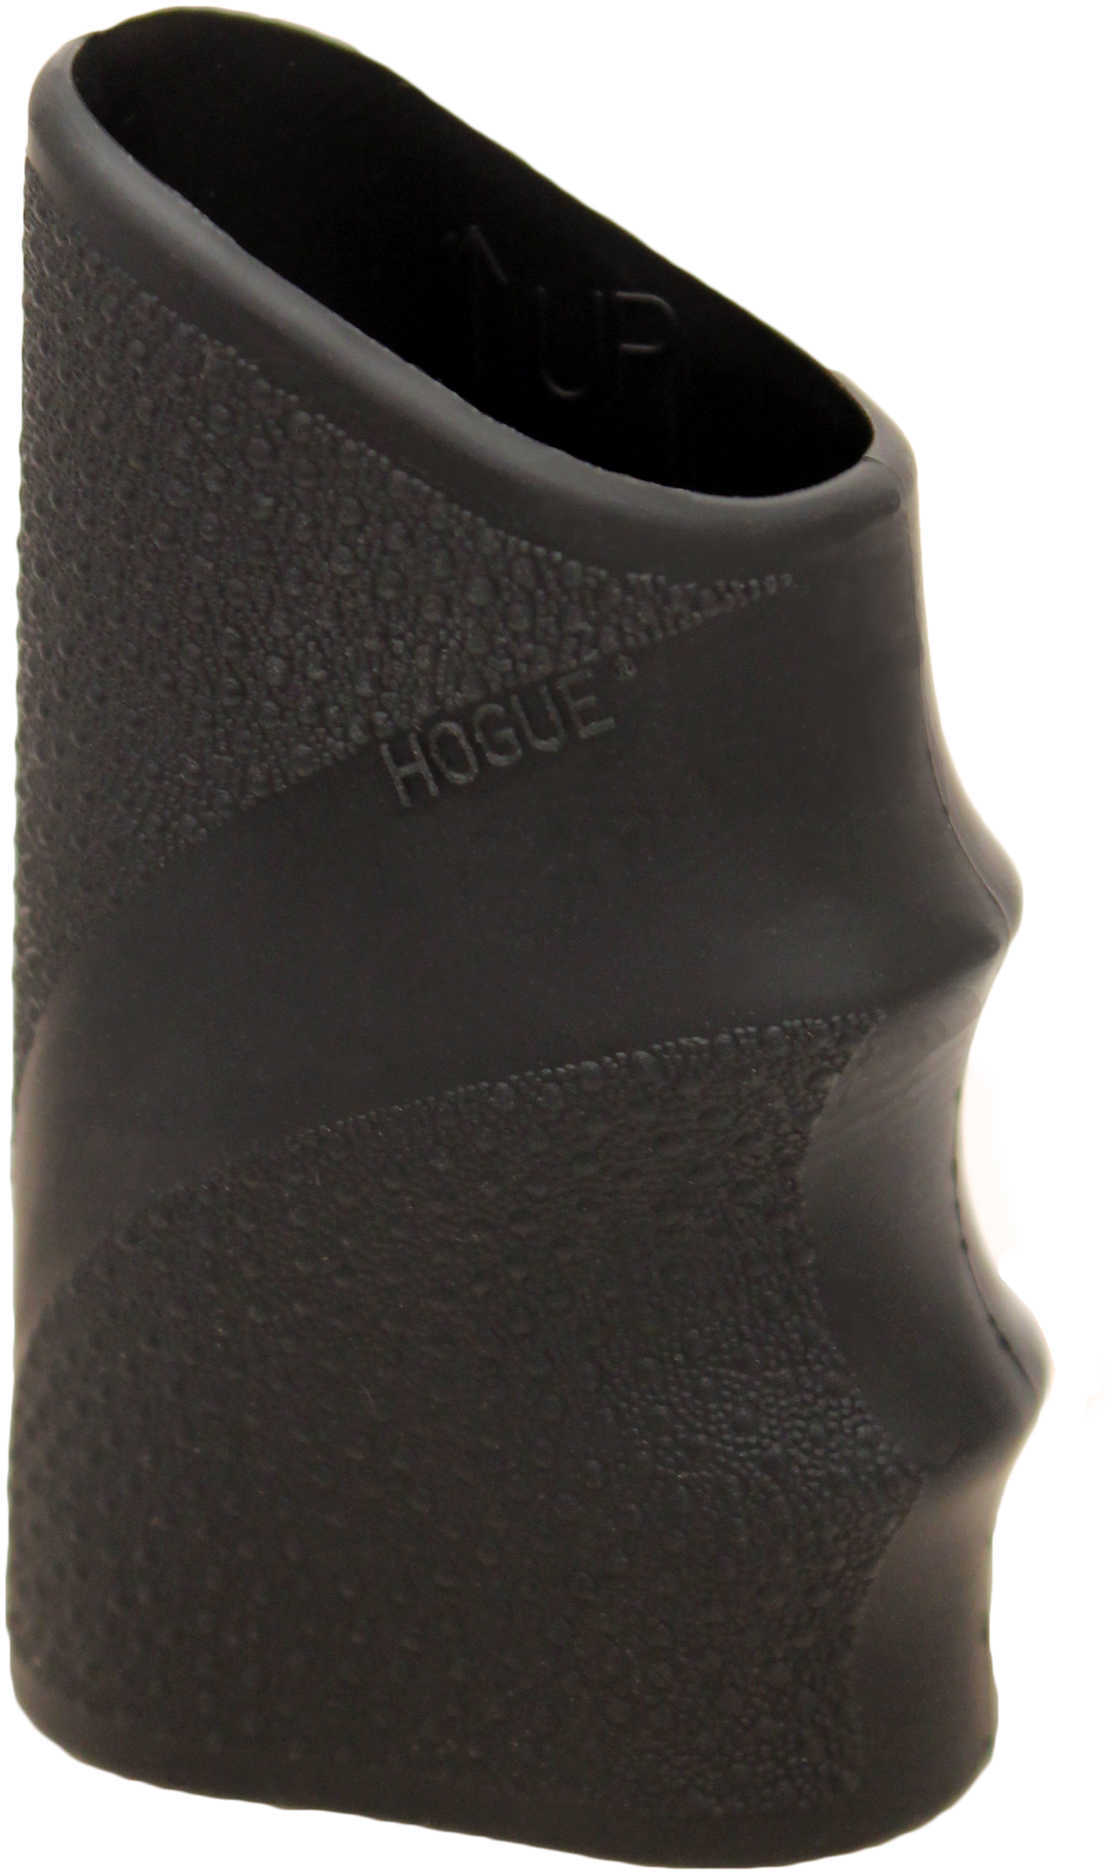 Hogue 17110 HandAll Tactical Small Grip Sleeve Textured Rubber Black